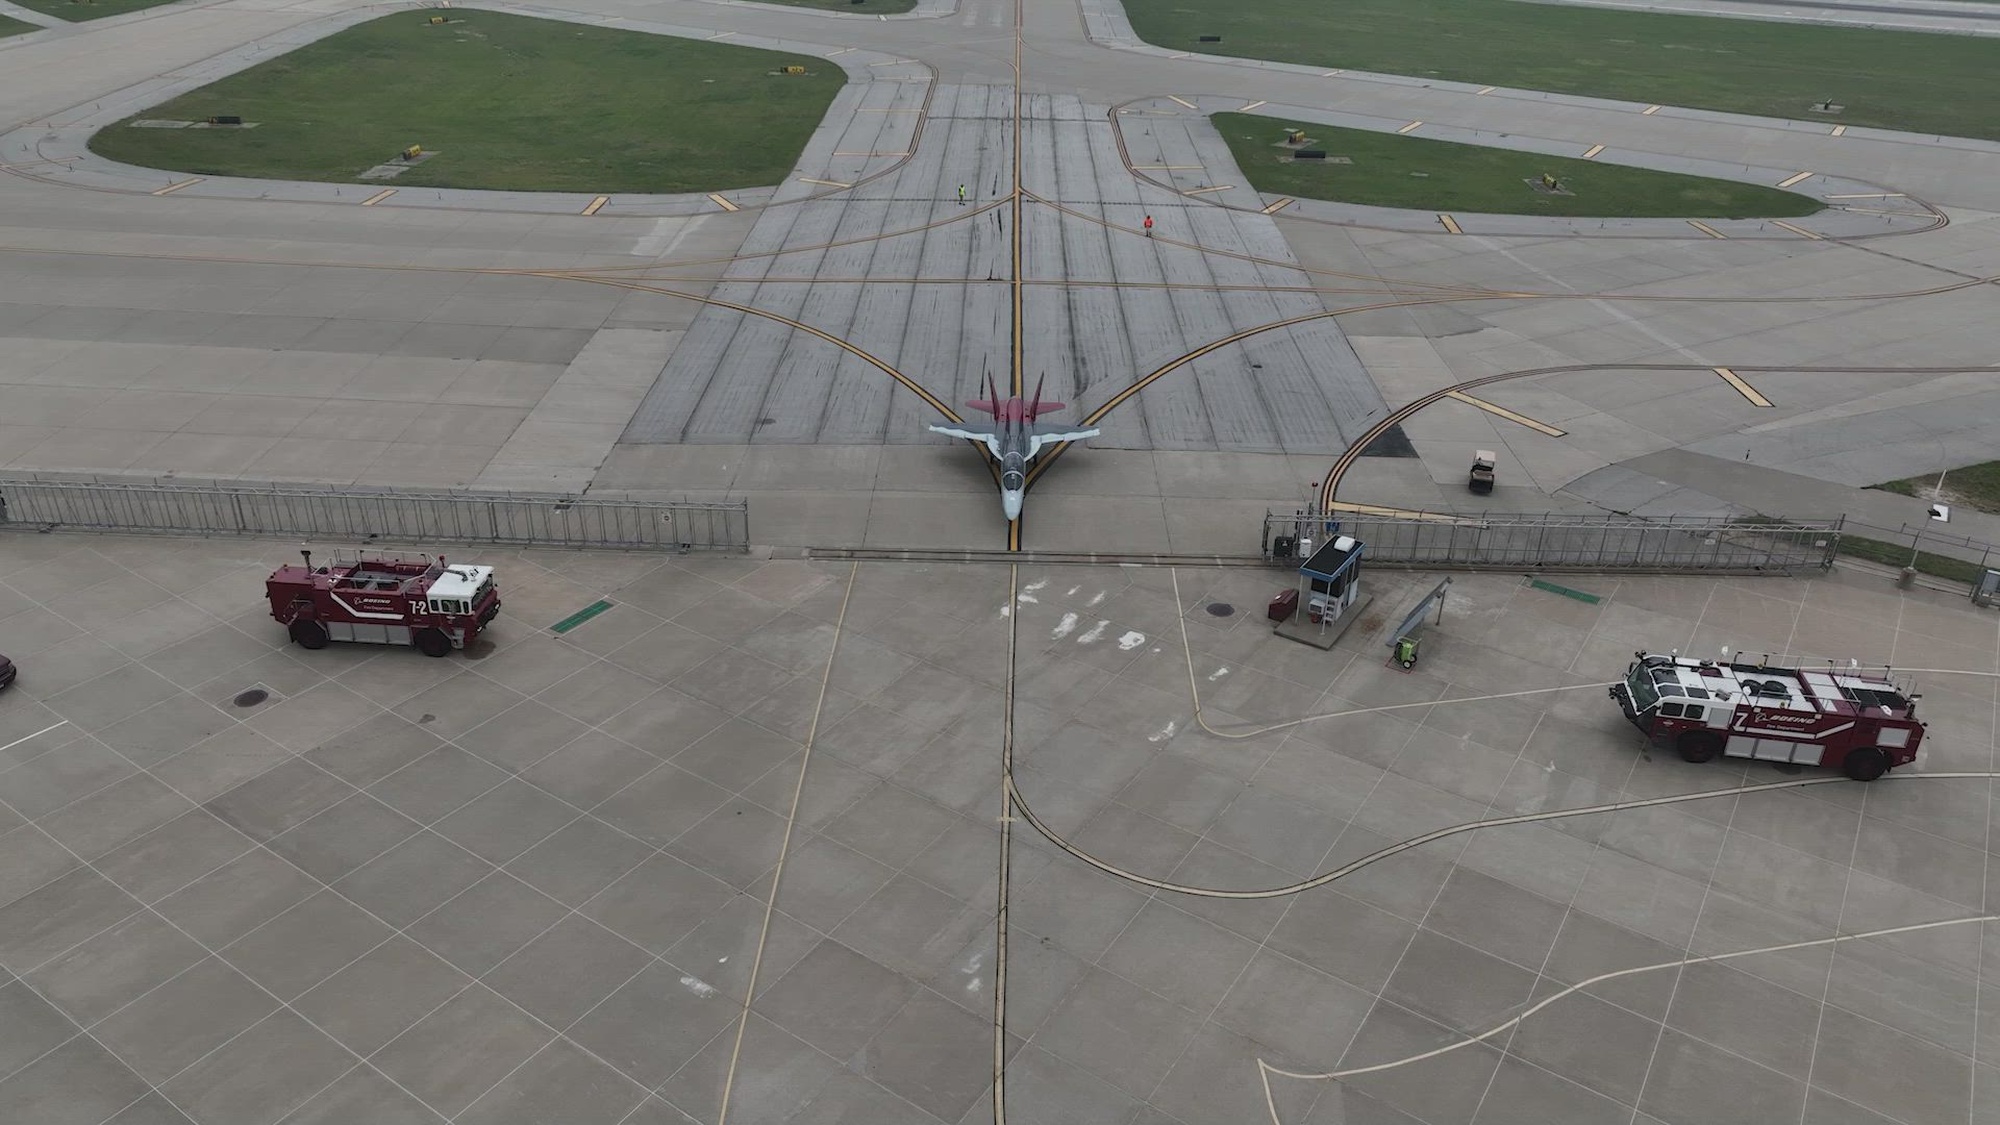 The T-7A Red Hawk piloted by Maj. Bryce Turner, 416th Flight Test Squadron, receives a water salute at the Boeing aircraft delivery center in St. Louis, Missouri, June 28. Turner became the first Air Force pilot to fly the T-7A Red Hawk, following a test flight the same day. (Video courtesy of Boeing)